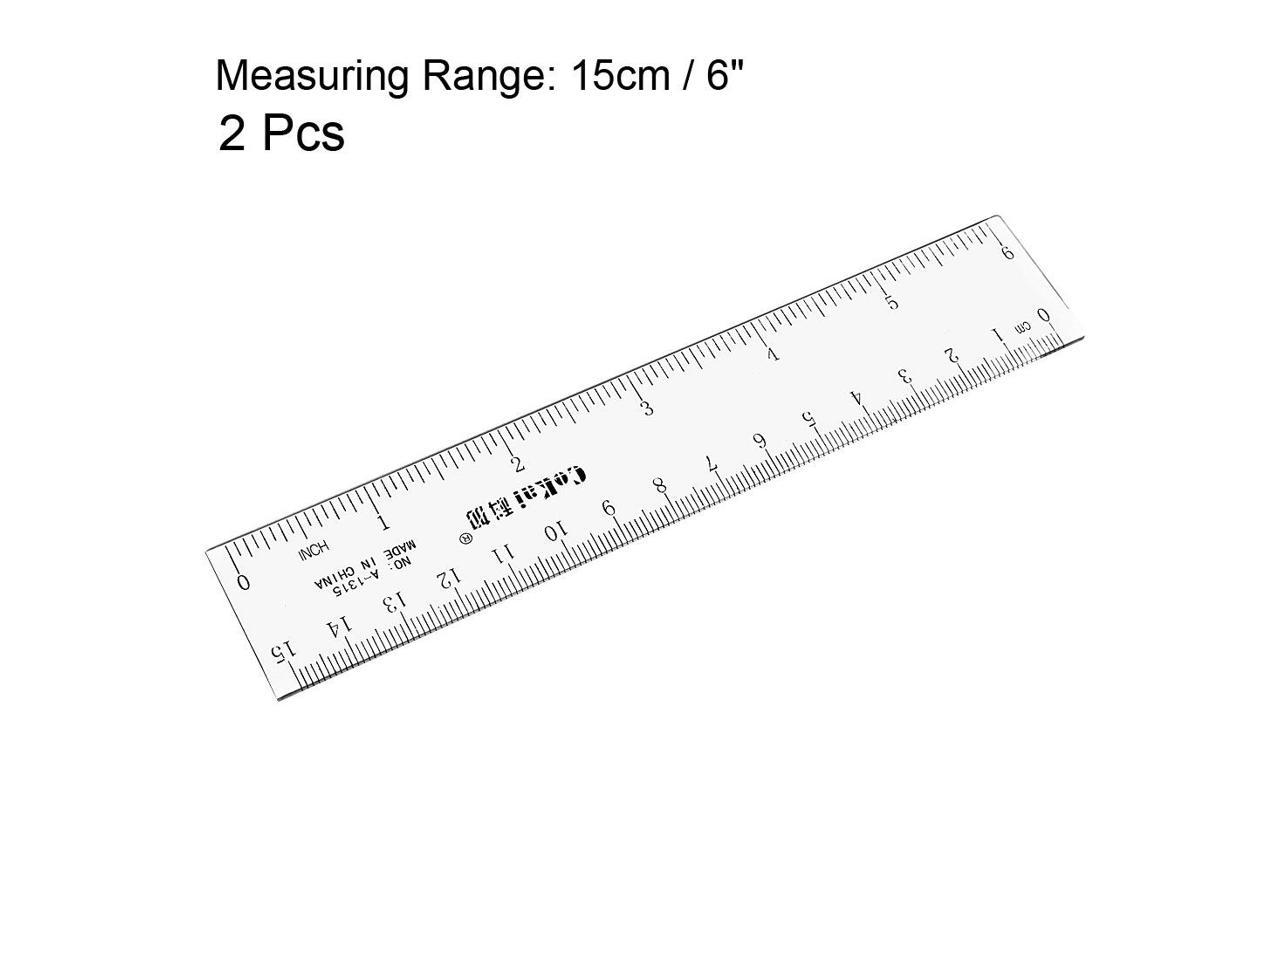 Details about   Straight Ruler Measuring Tool 15cm 6 Inch Metric Inch Plastic for Office